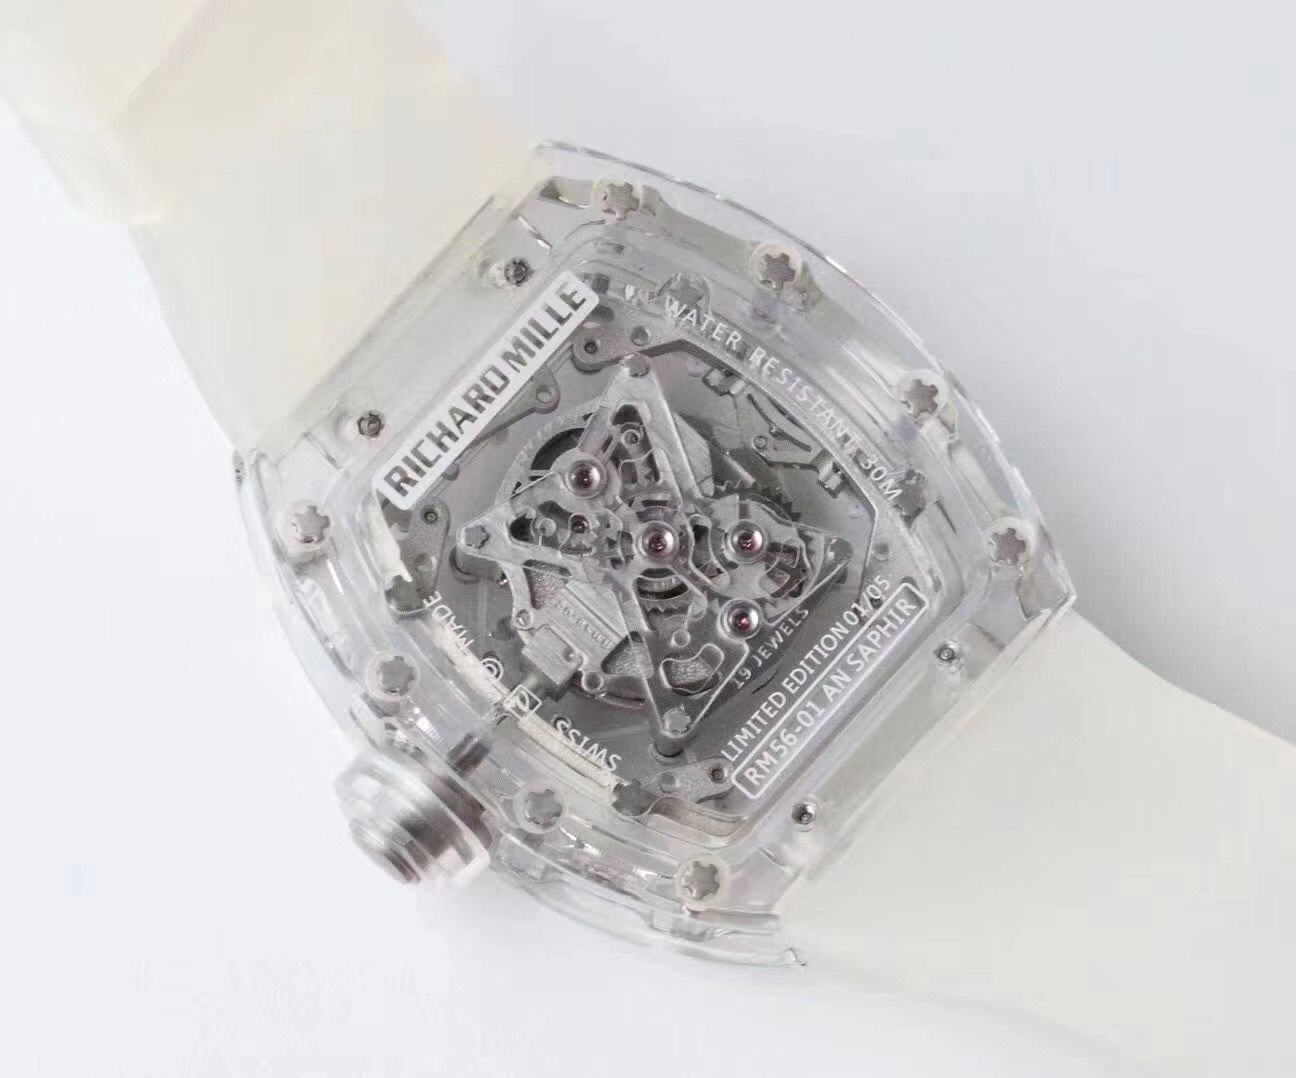 Richard Mille RM056-01 Limtied Edition White Dial